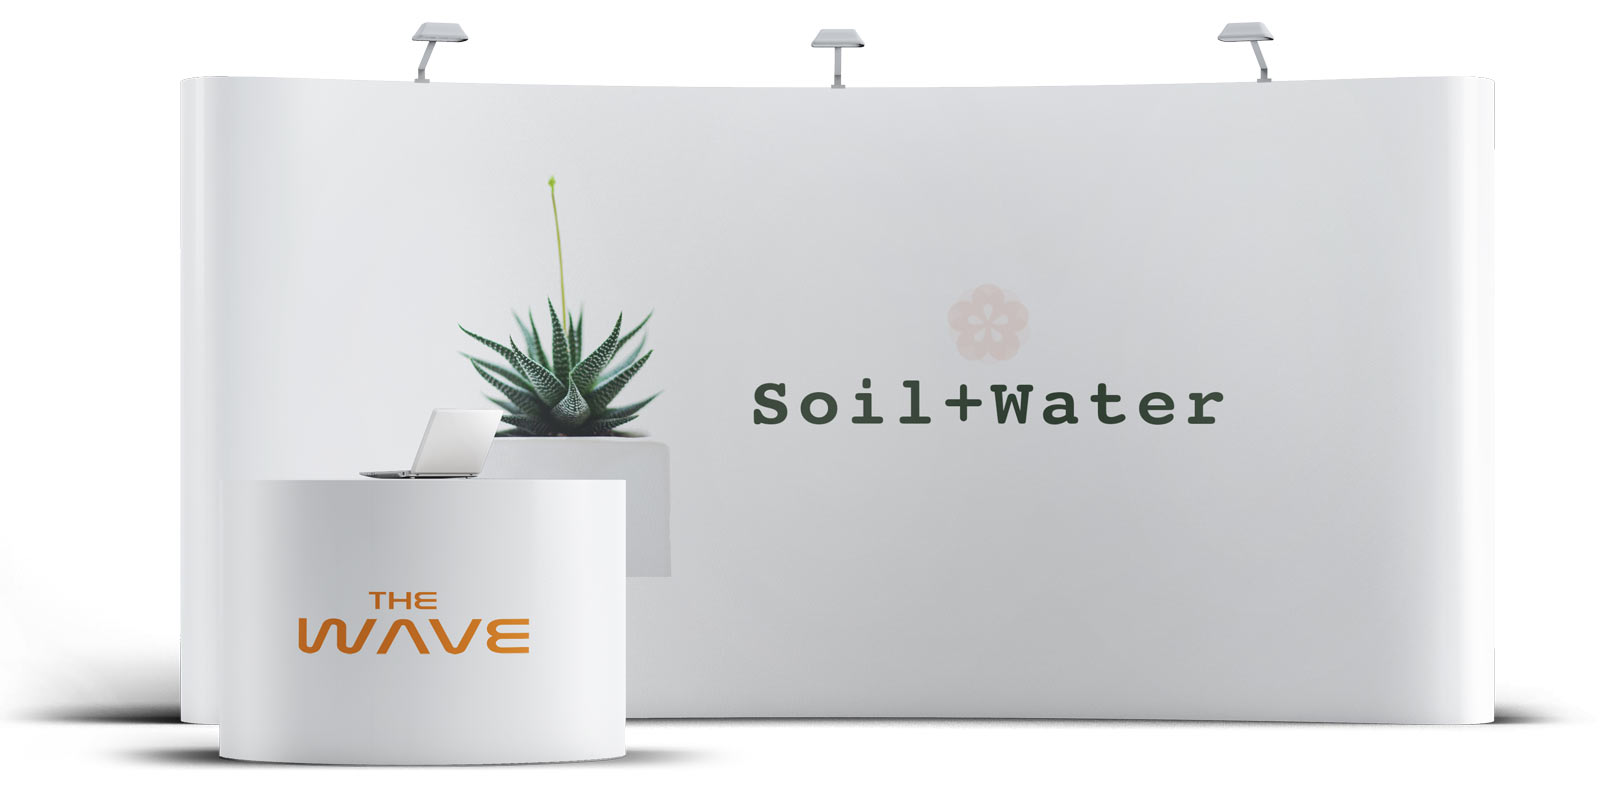 Soil + Water - exhibitor at The WAVE Chiropractic Conference